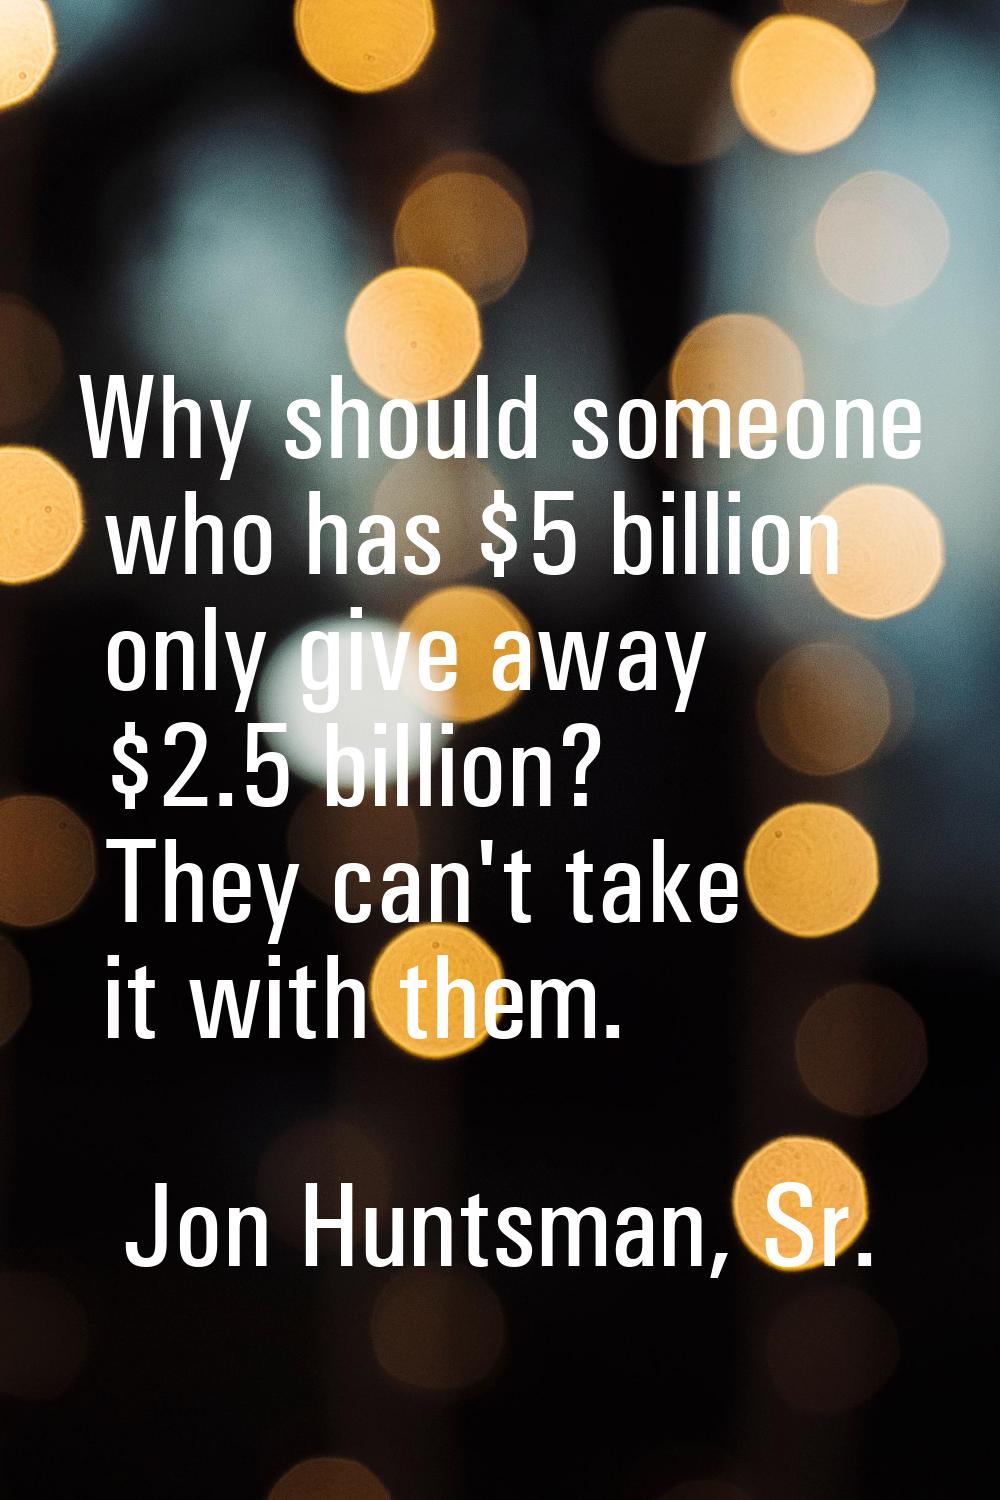 Why should someone who has $5 billion only give away $2.5 billion? They can't take it with them.